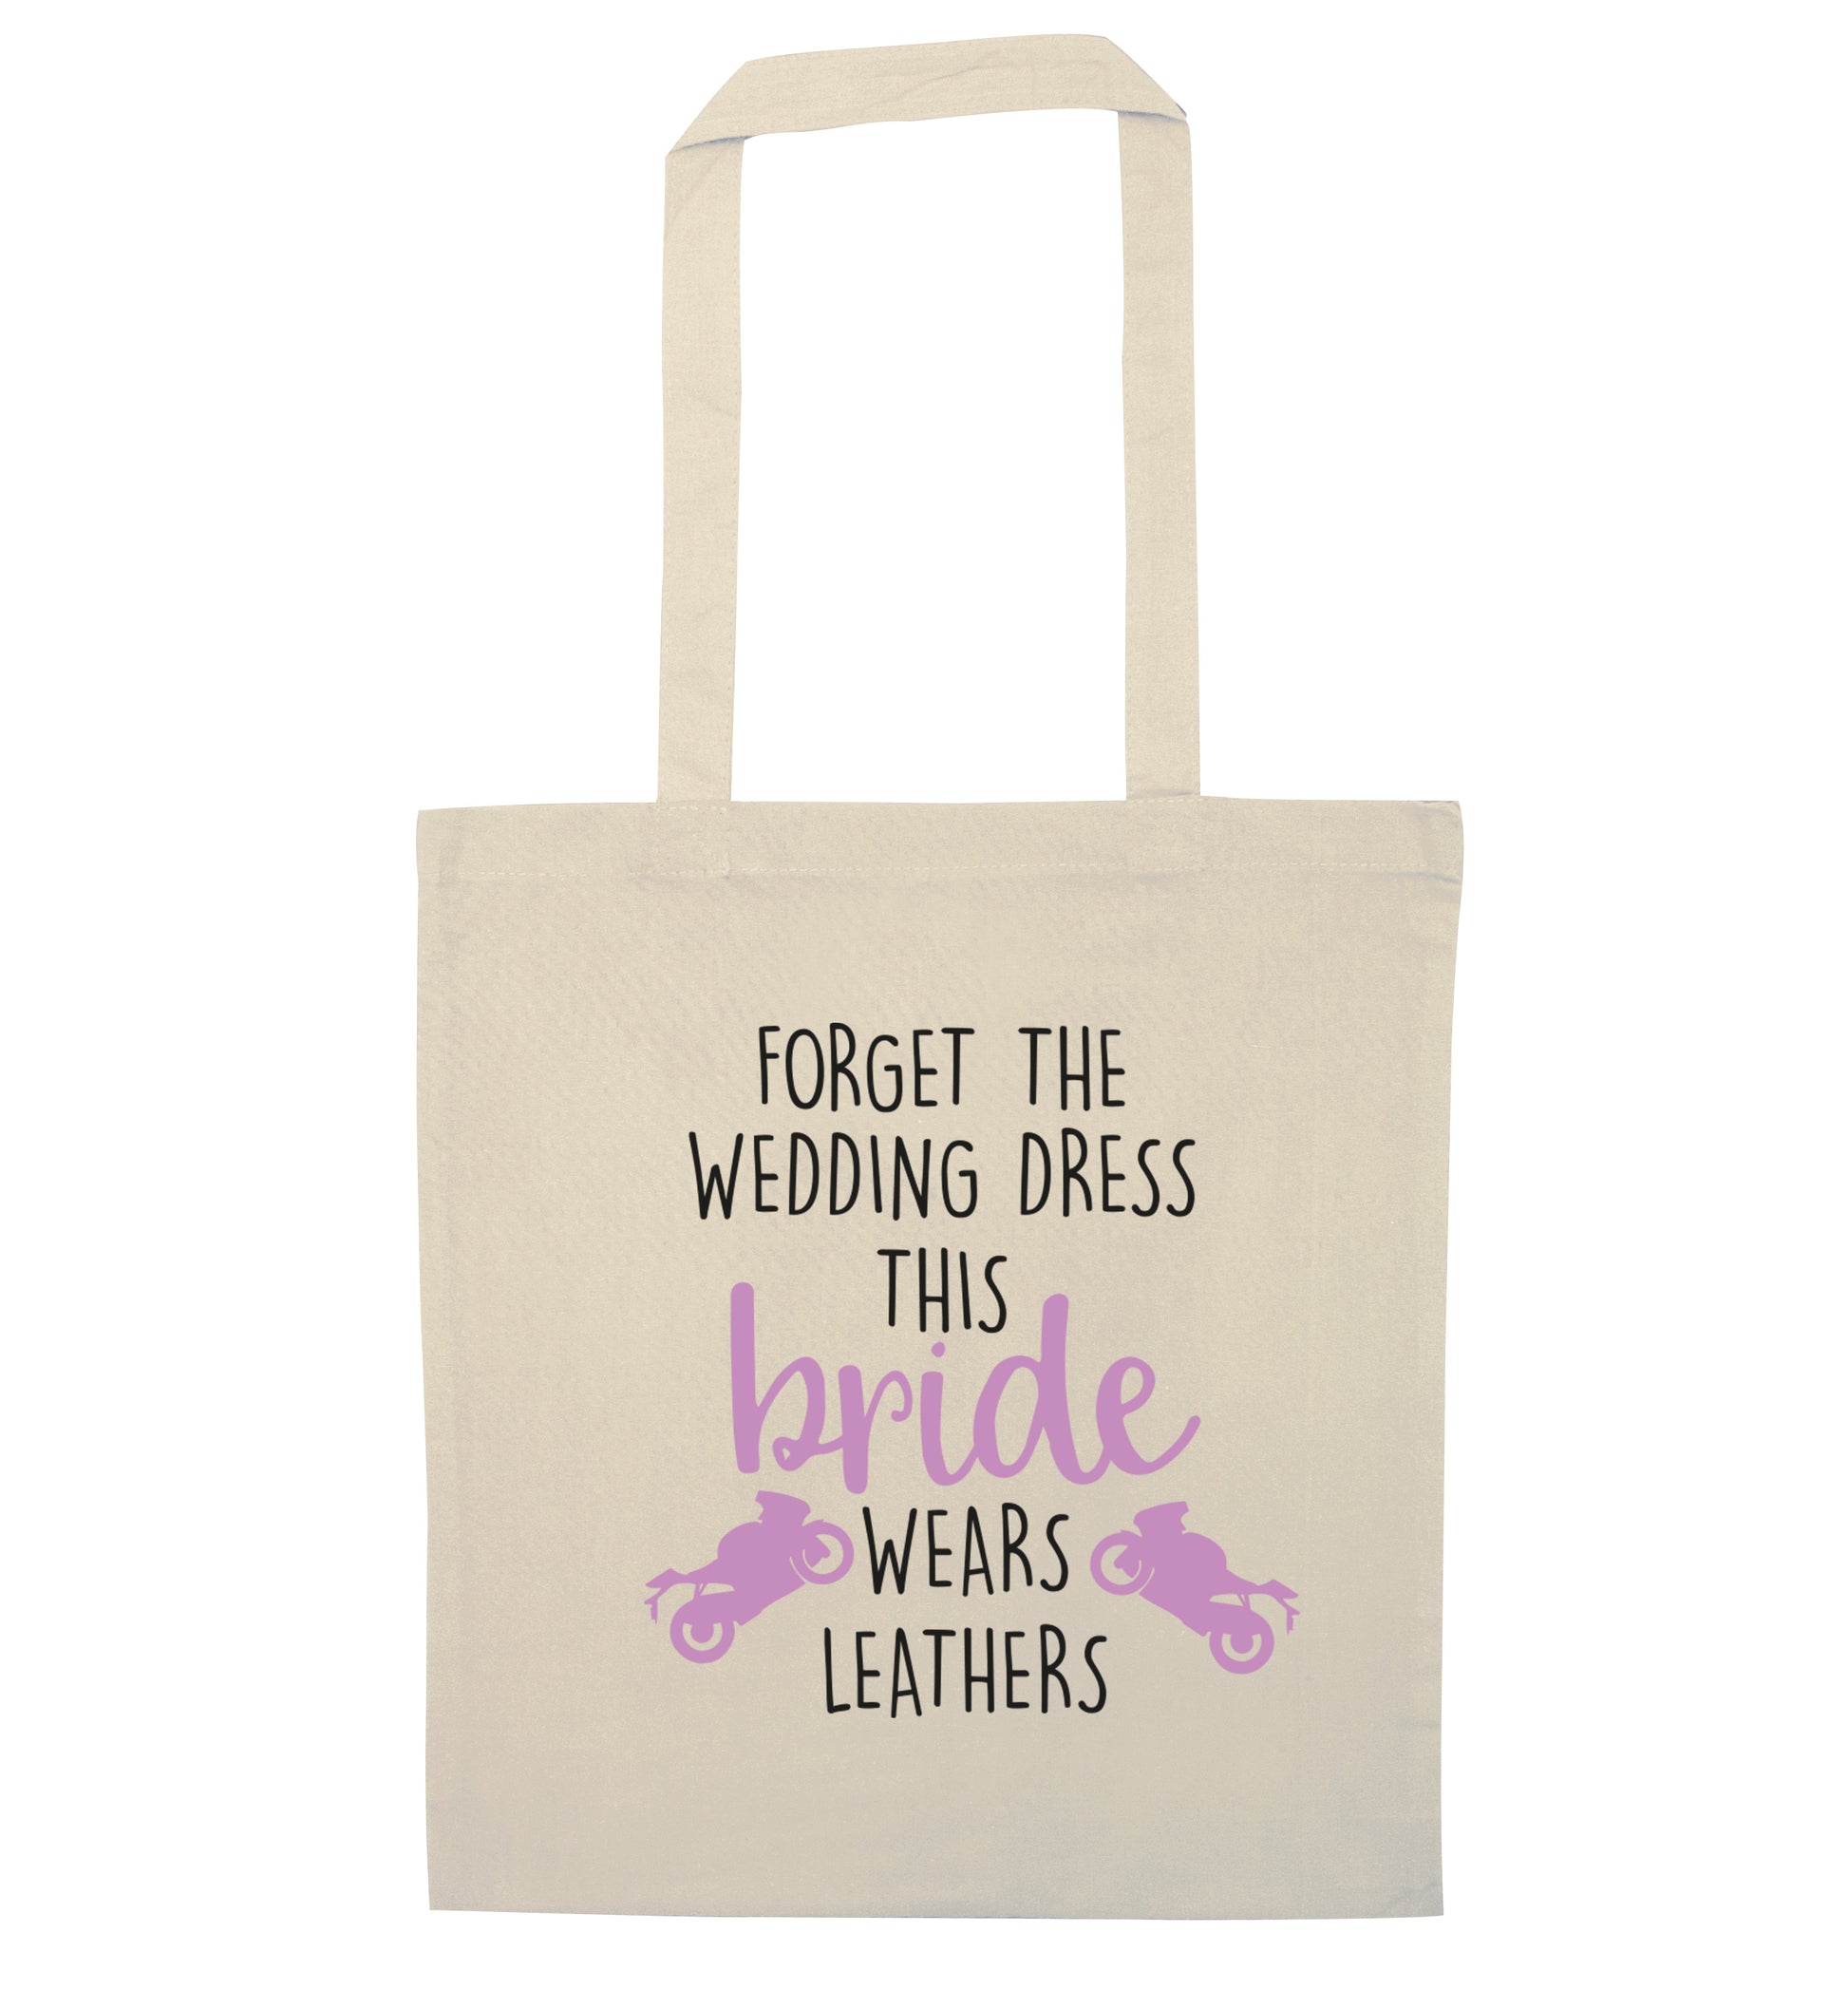 Forget the wedding dress this bride wears leathers natural tote bag